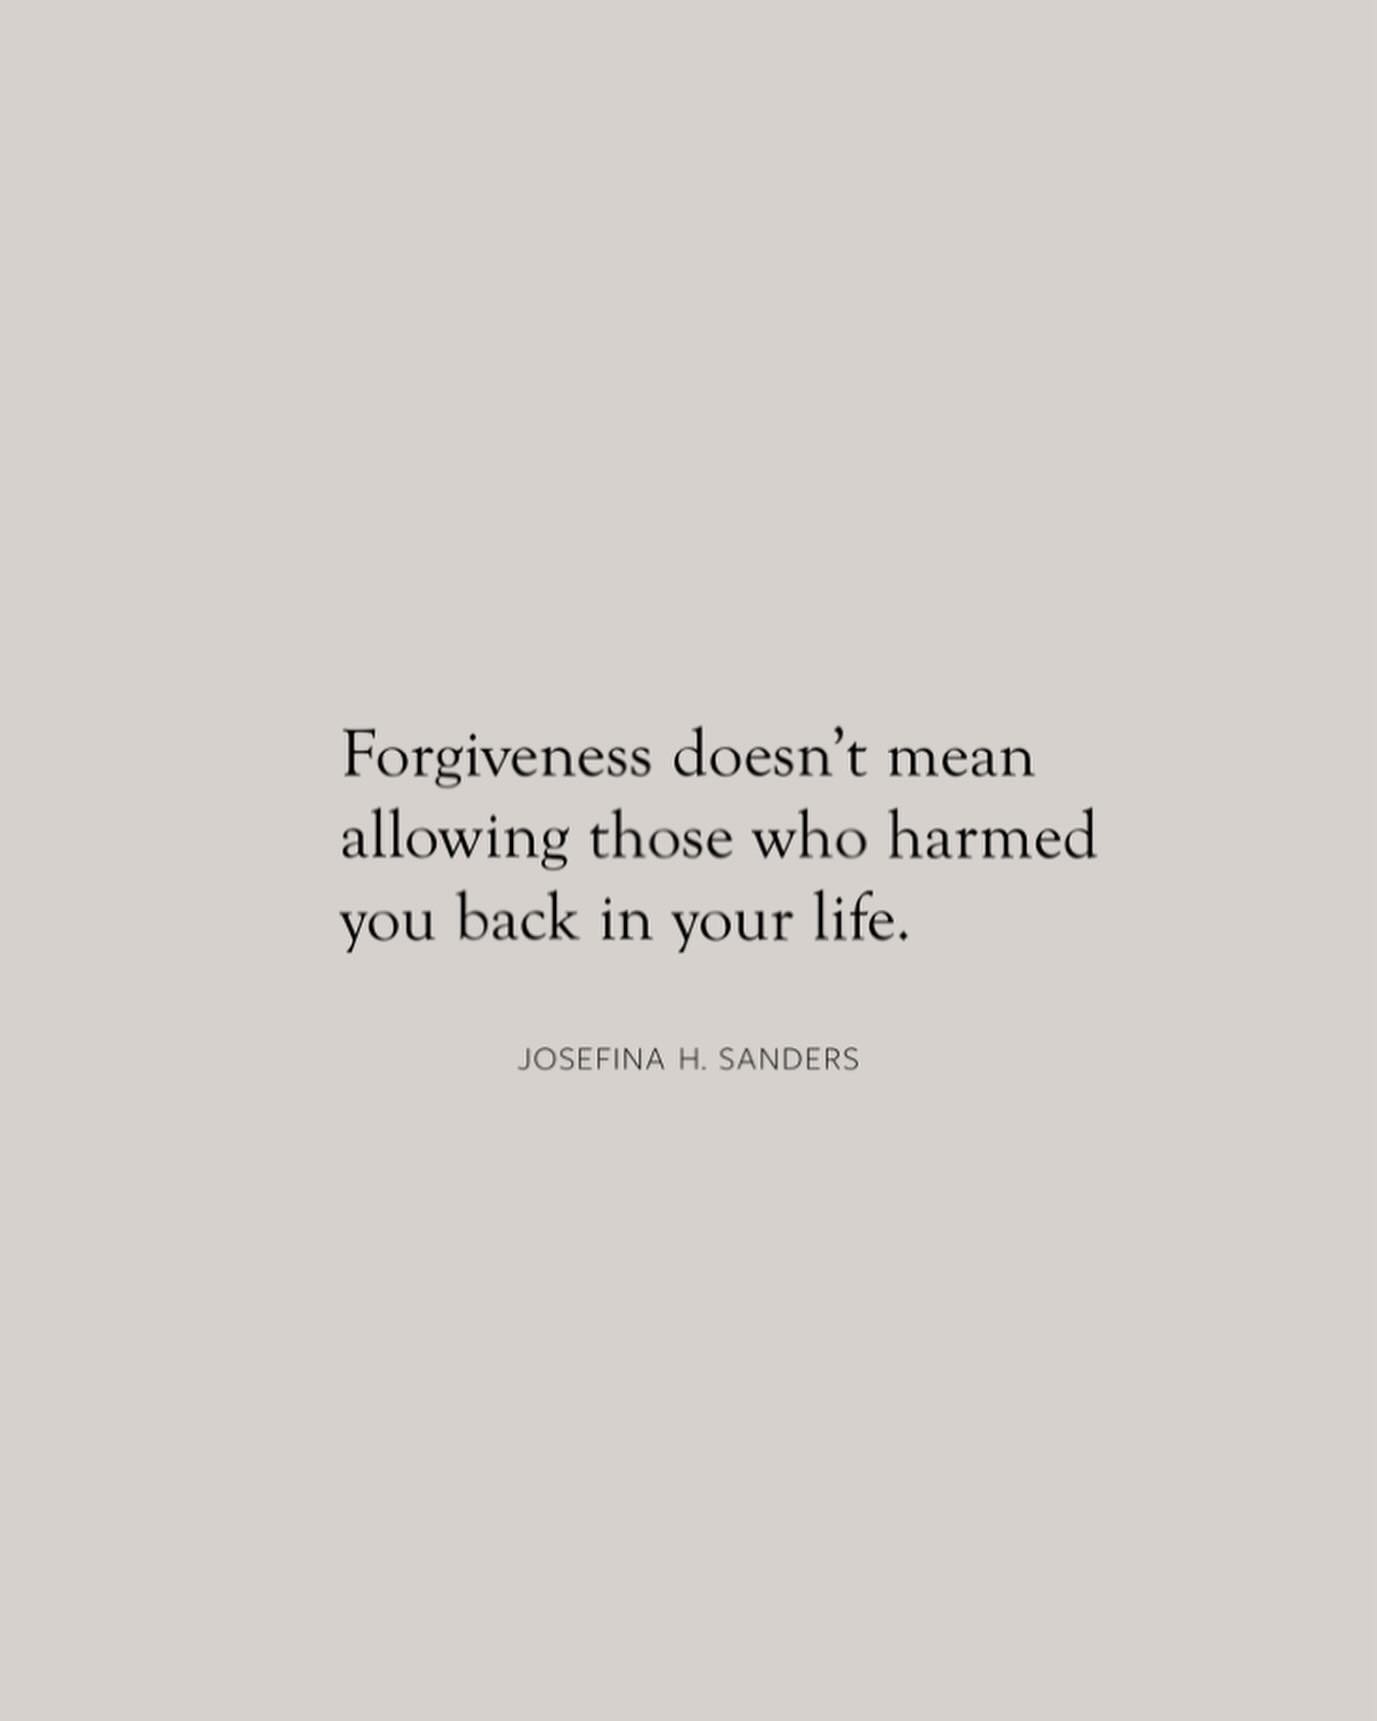 You don't have to stay in spaces that continue to harm You. 

Forgiveness doesn't mean reunification, self-abandonment, or shrinking to keep others at rest.

You can choose to forgive and hold others accountable by setting boundaries for yourself.

F